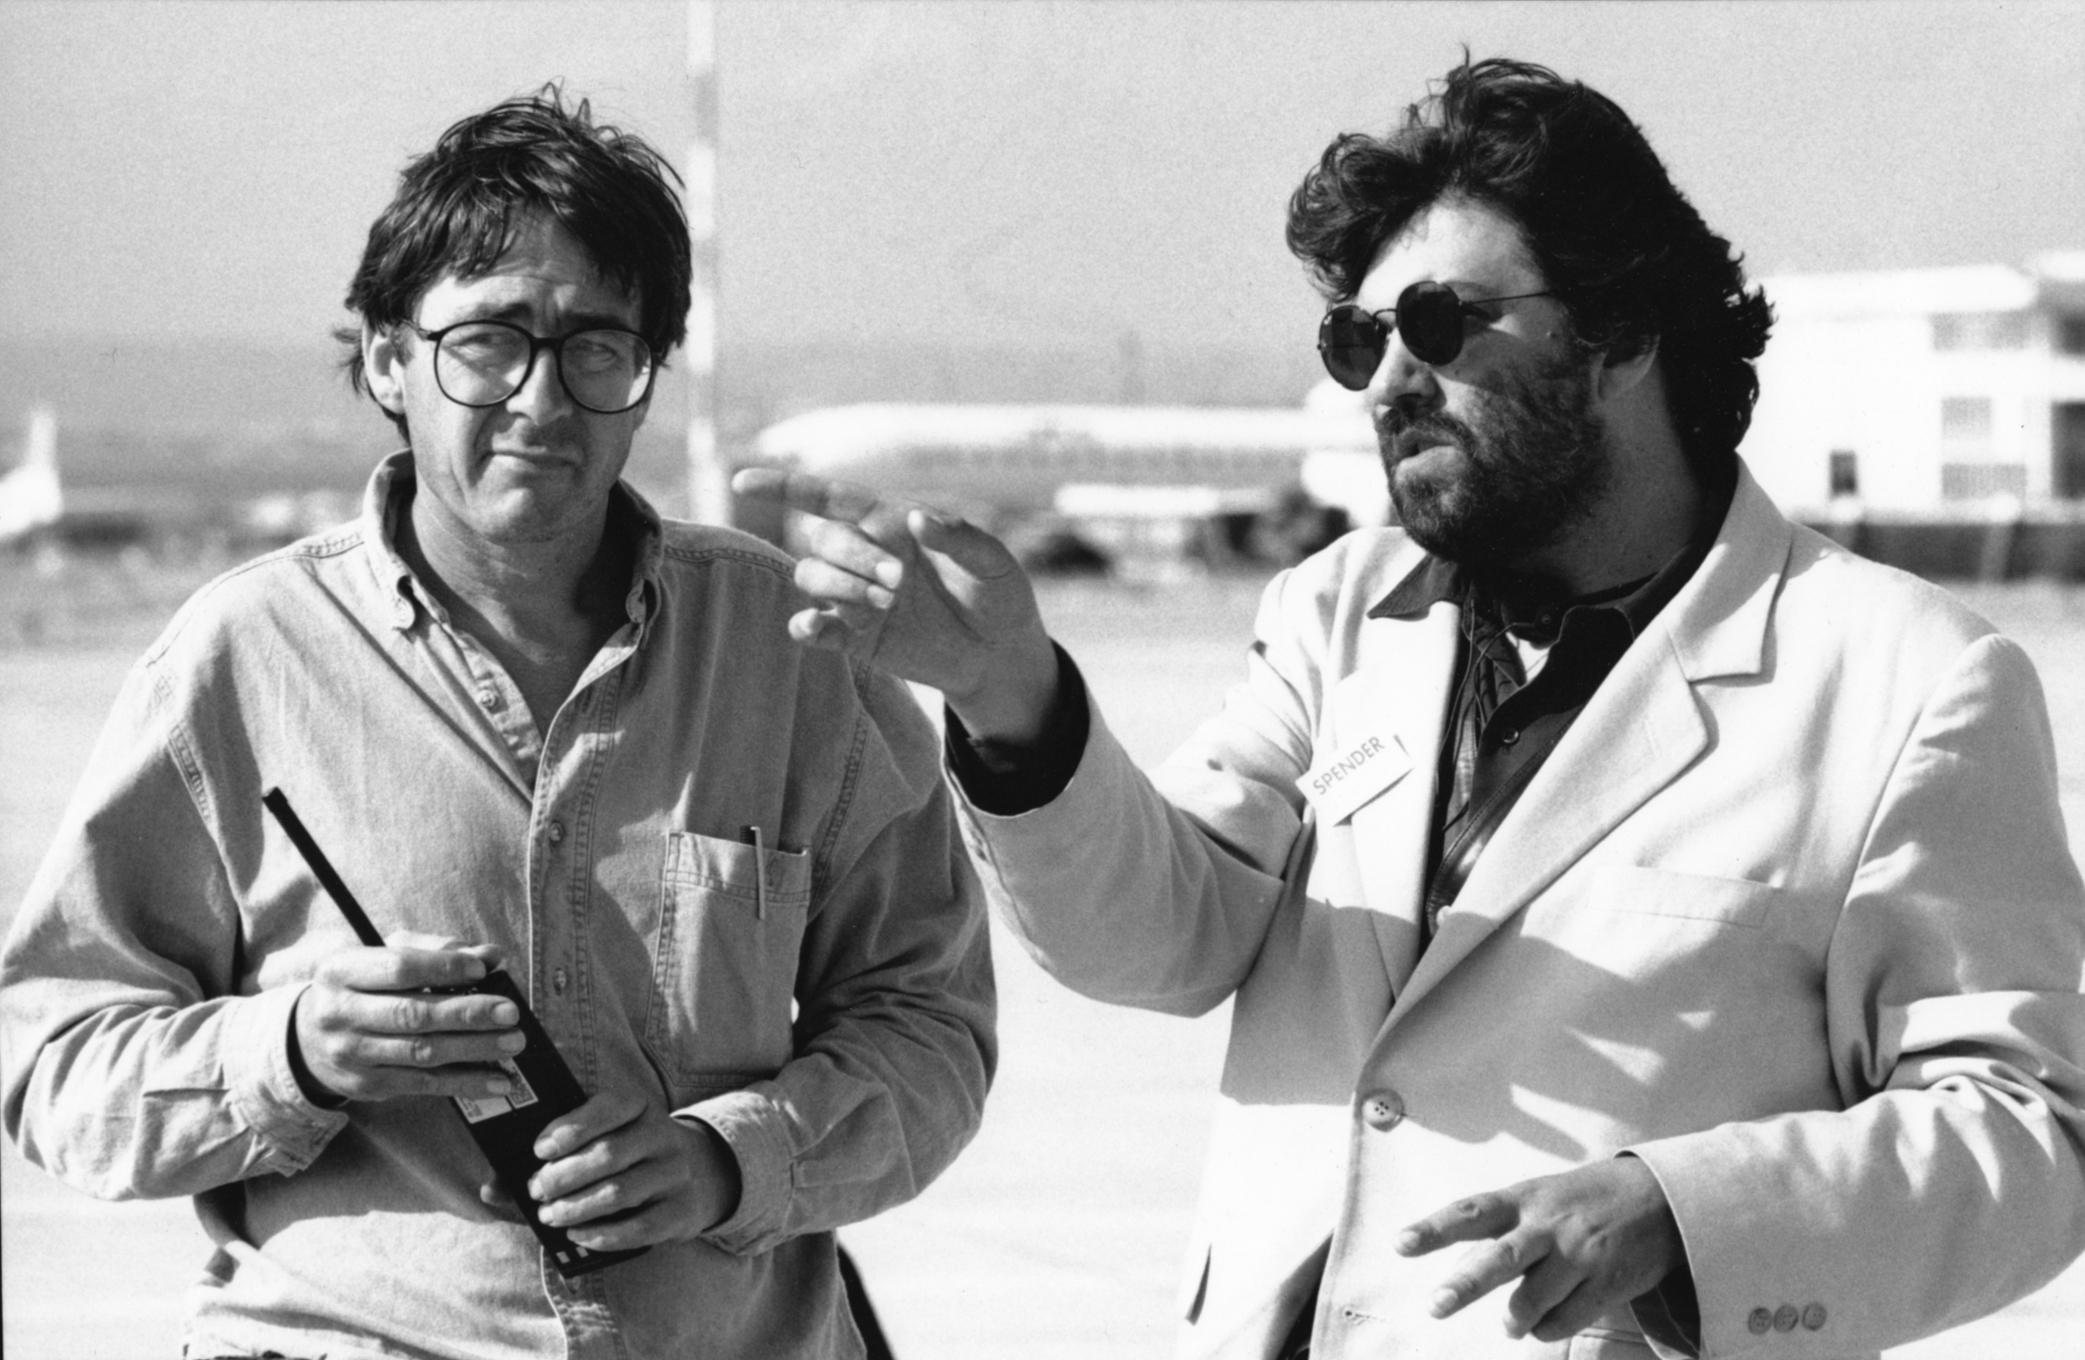 Matt Forrest (director) and Gareth Tandy (1st AD) on the 'Spender' movie set at Marseille Airport, France